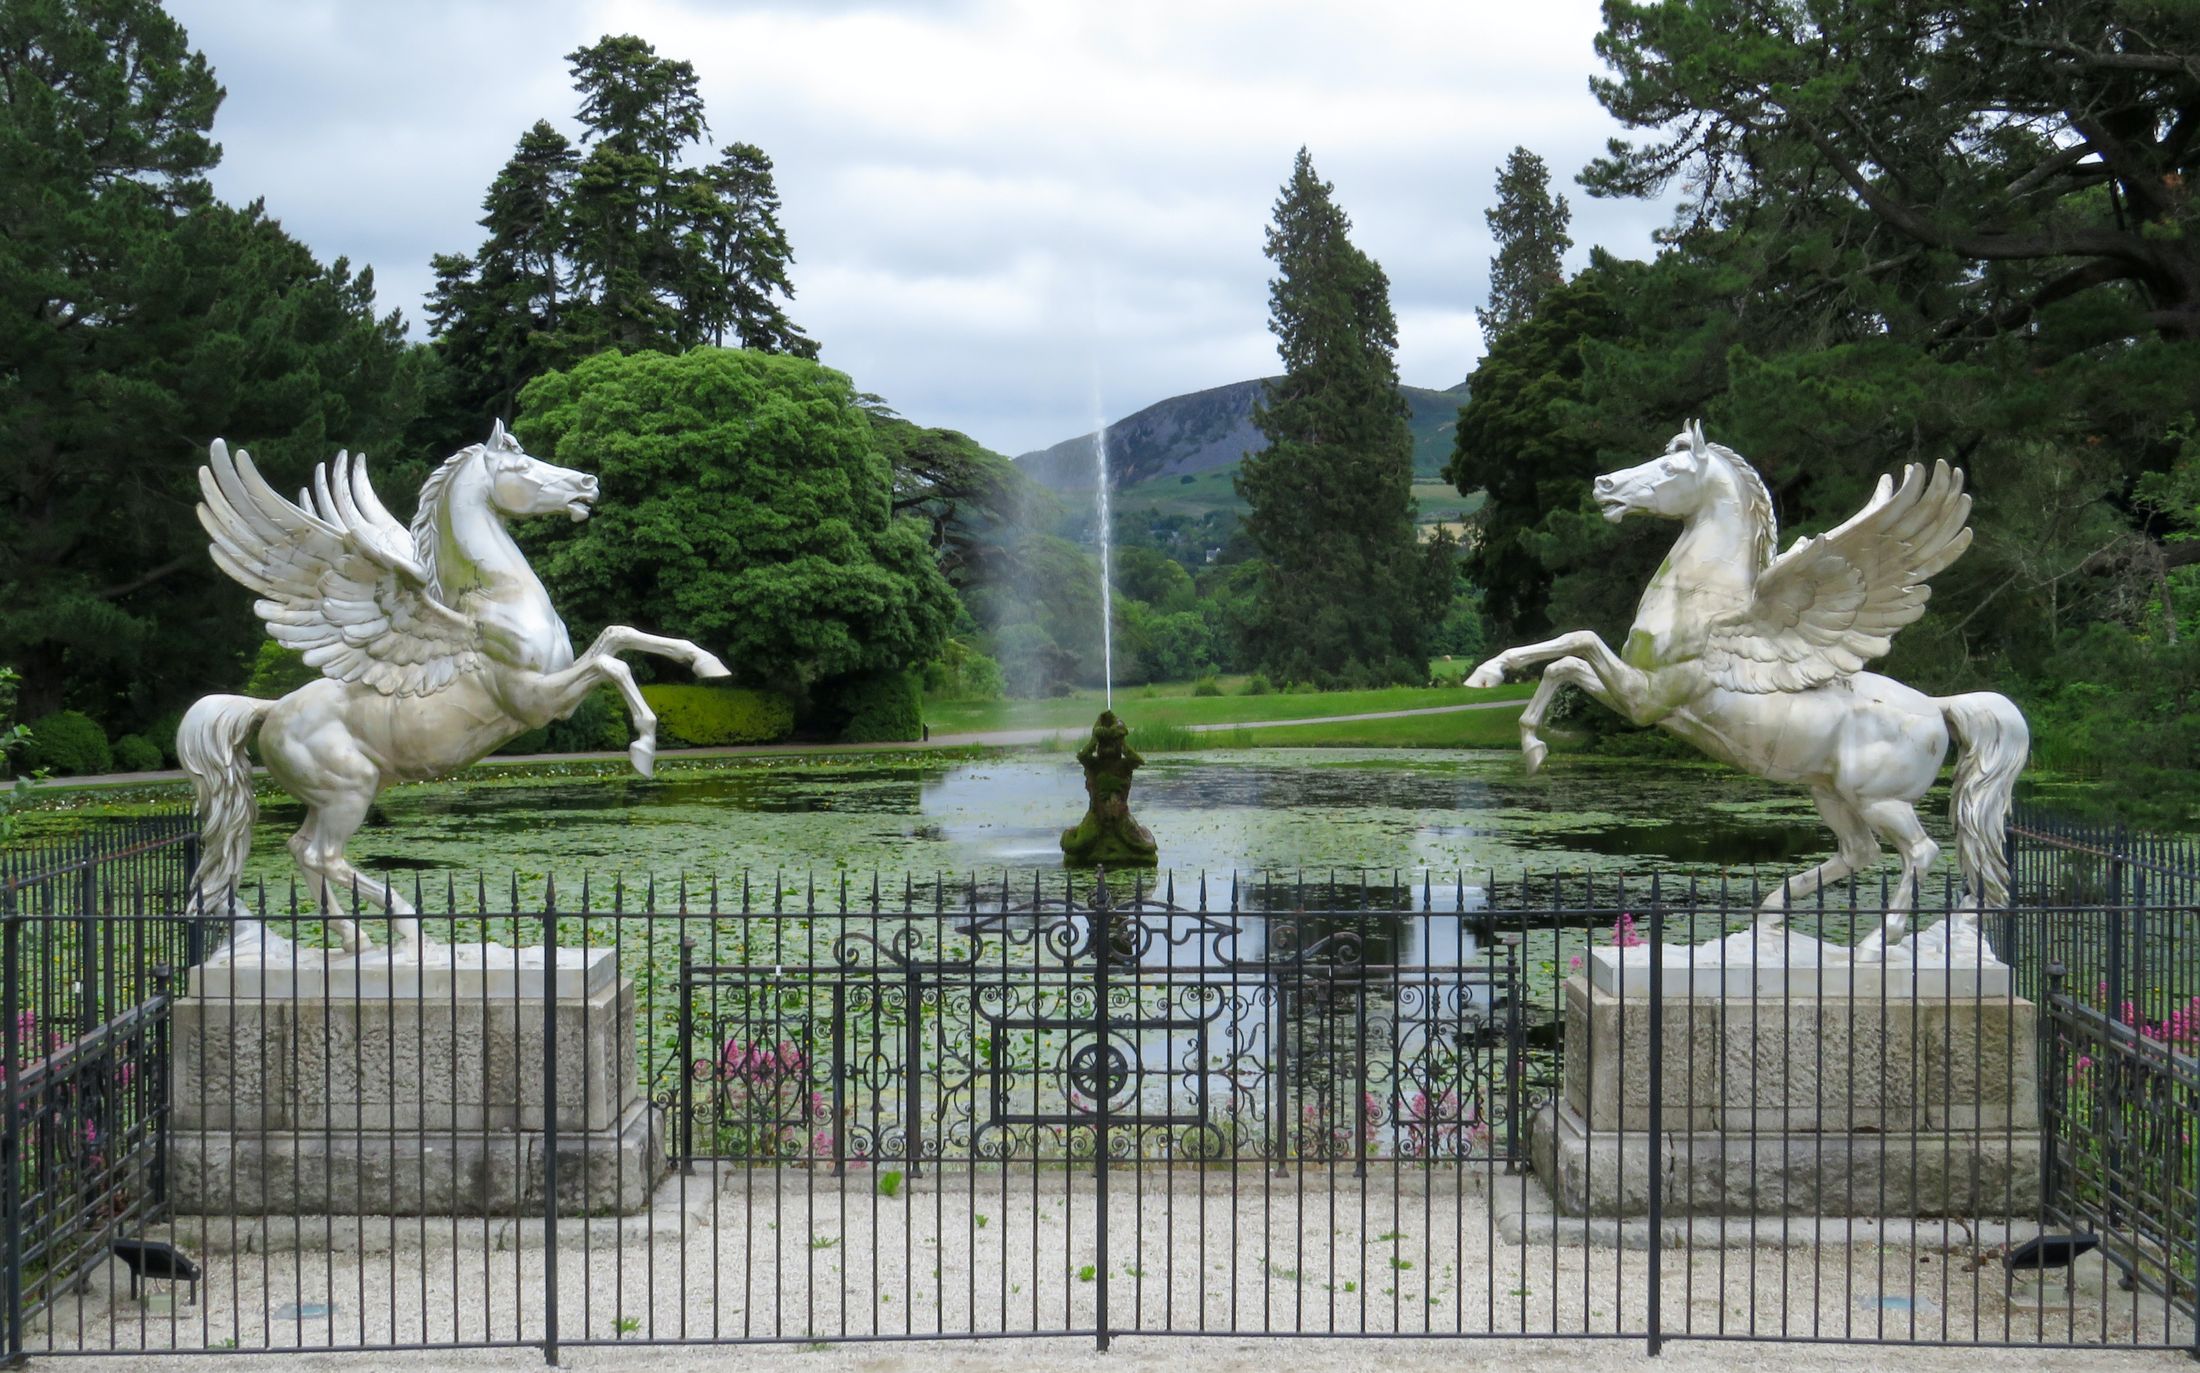 Powerscourt Estate: An Iconic Sustainable Visitor Attraction